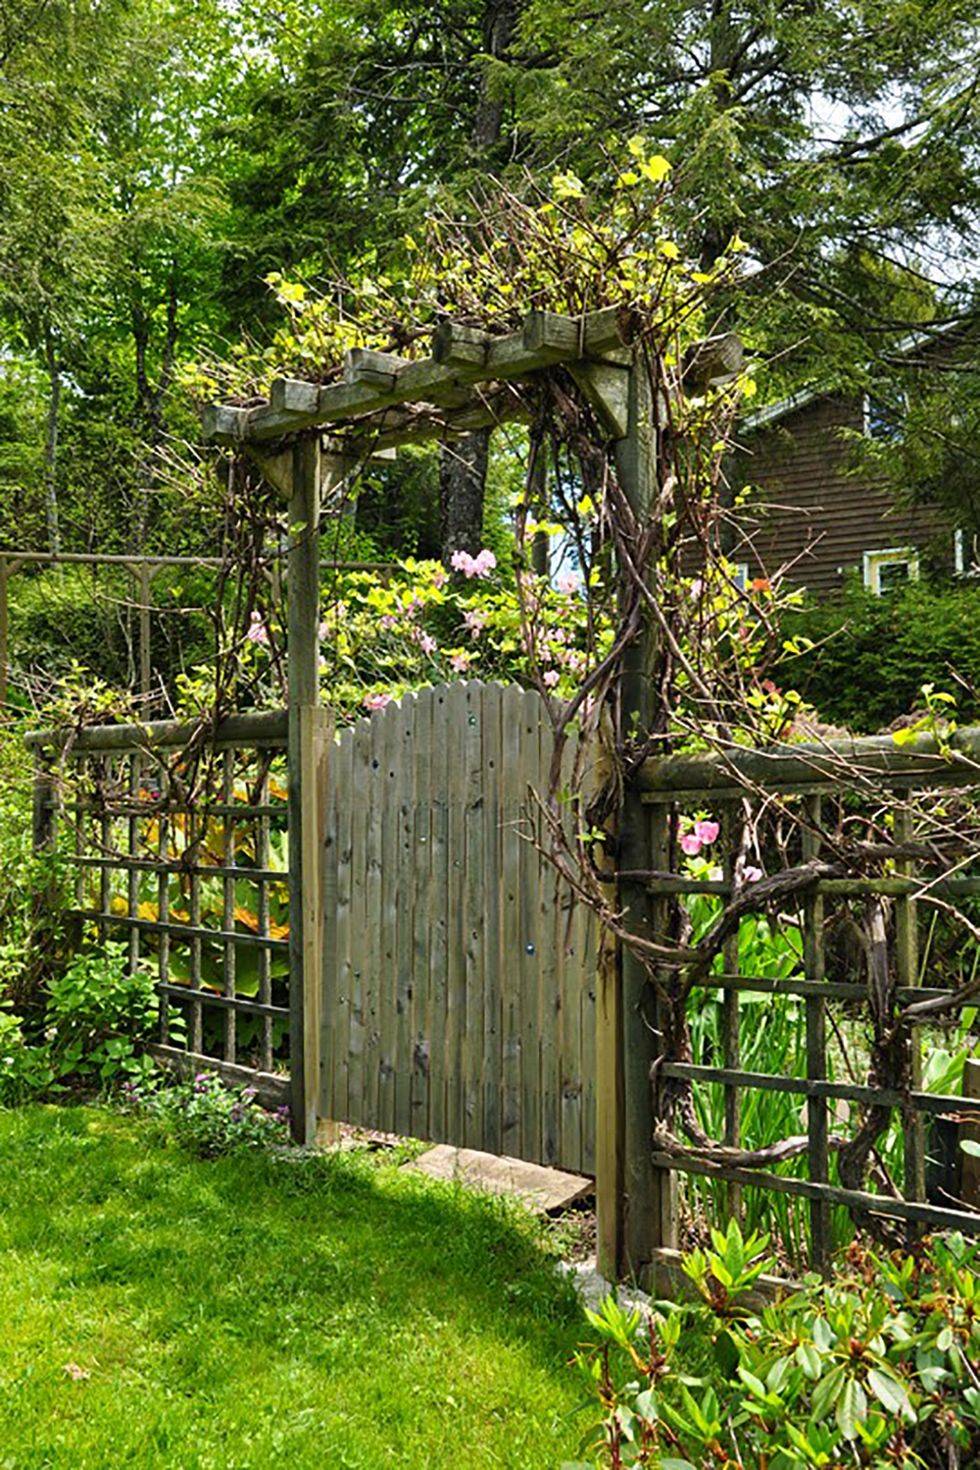 grape vine wrapped gate with green grass in garden